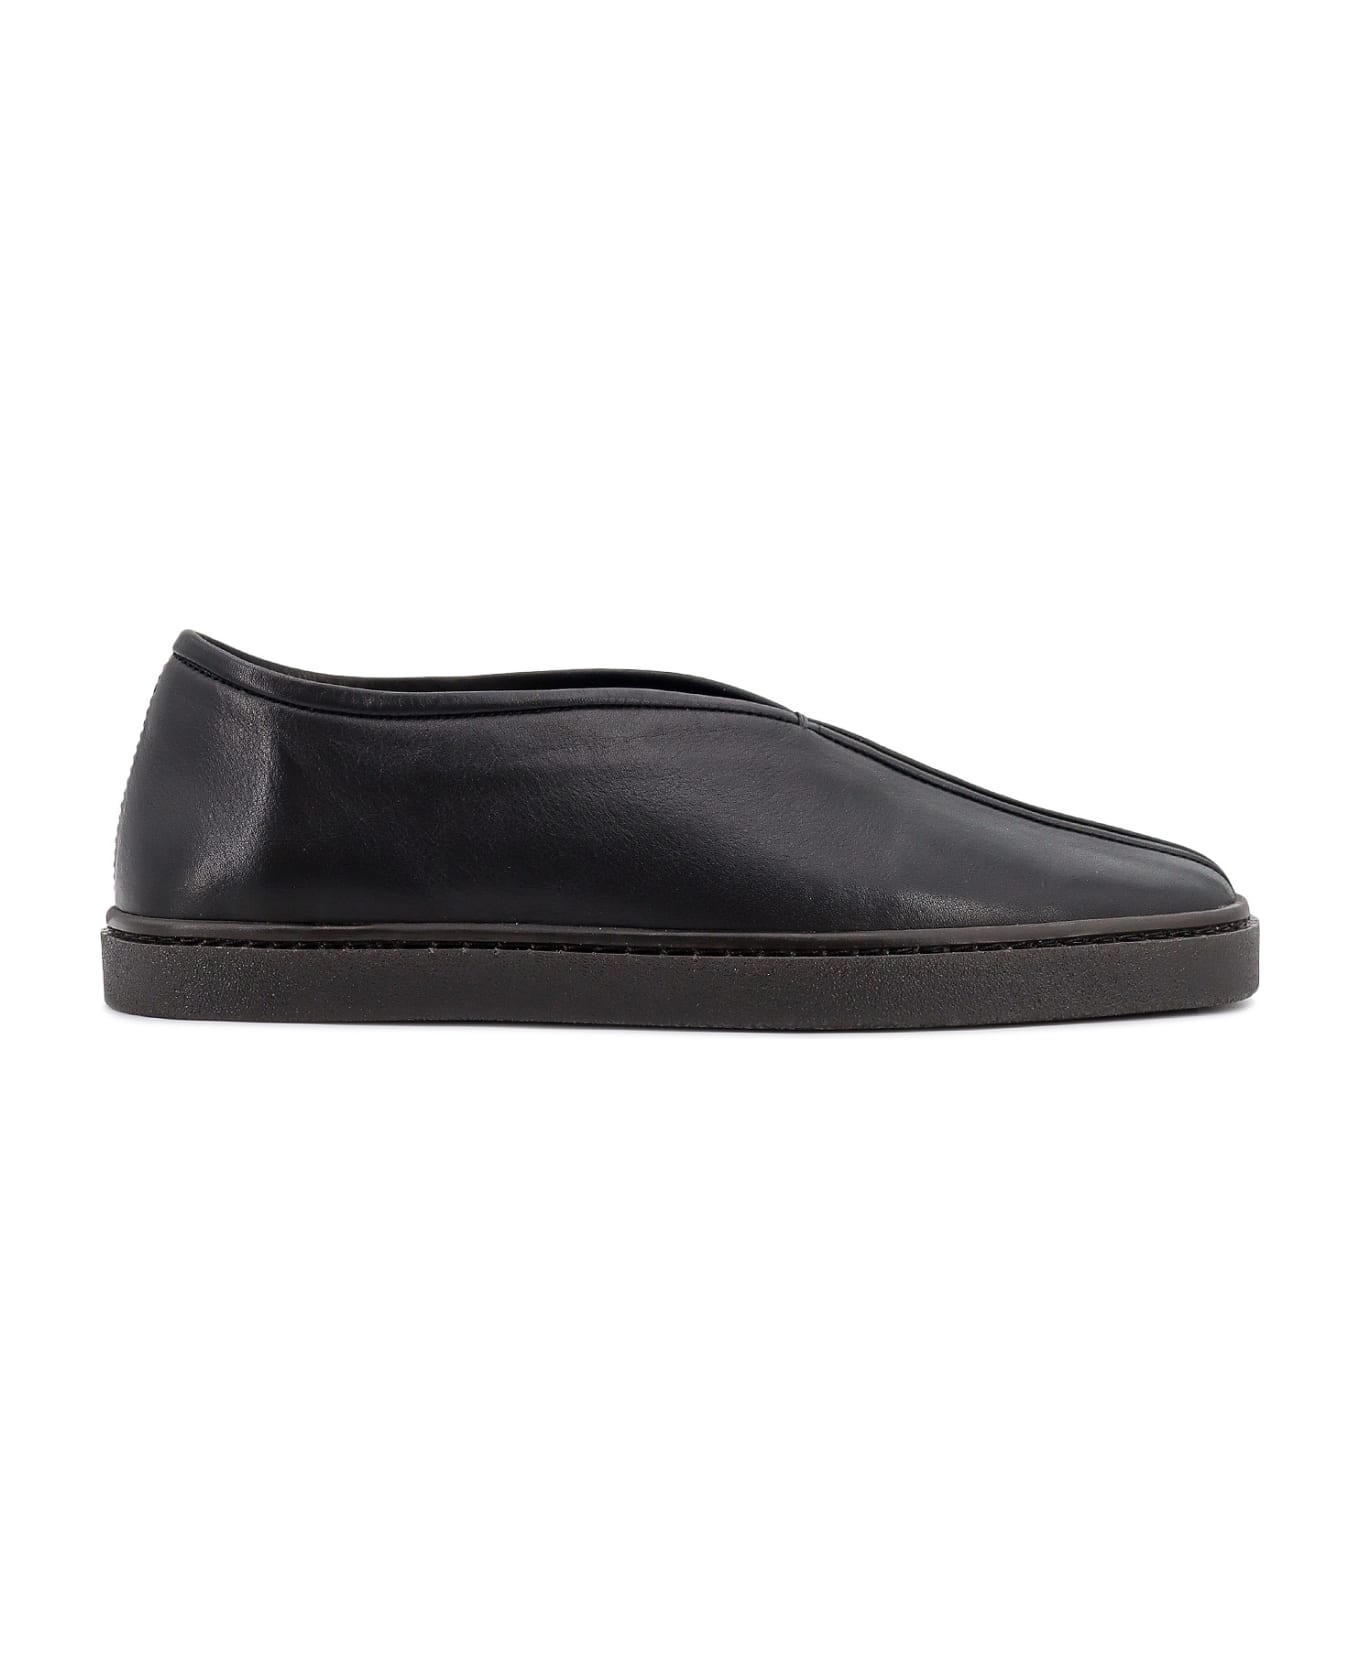 Lemaire Piped Sneakers - Black スニーカー